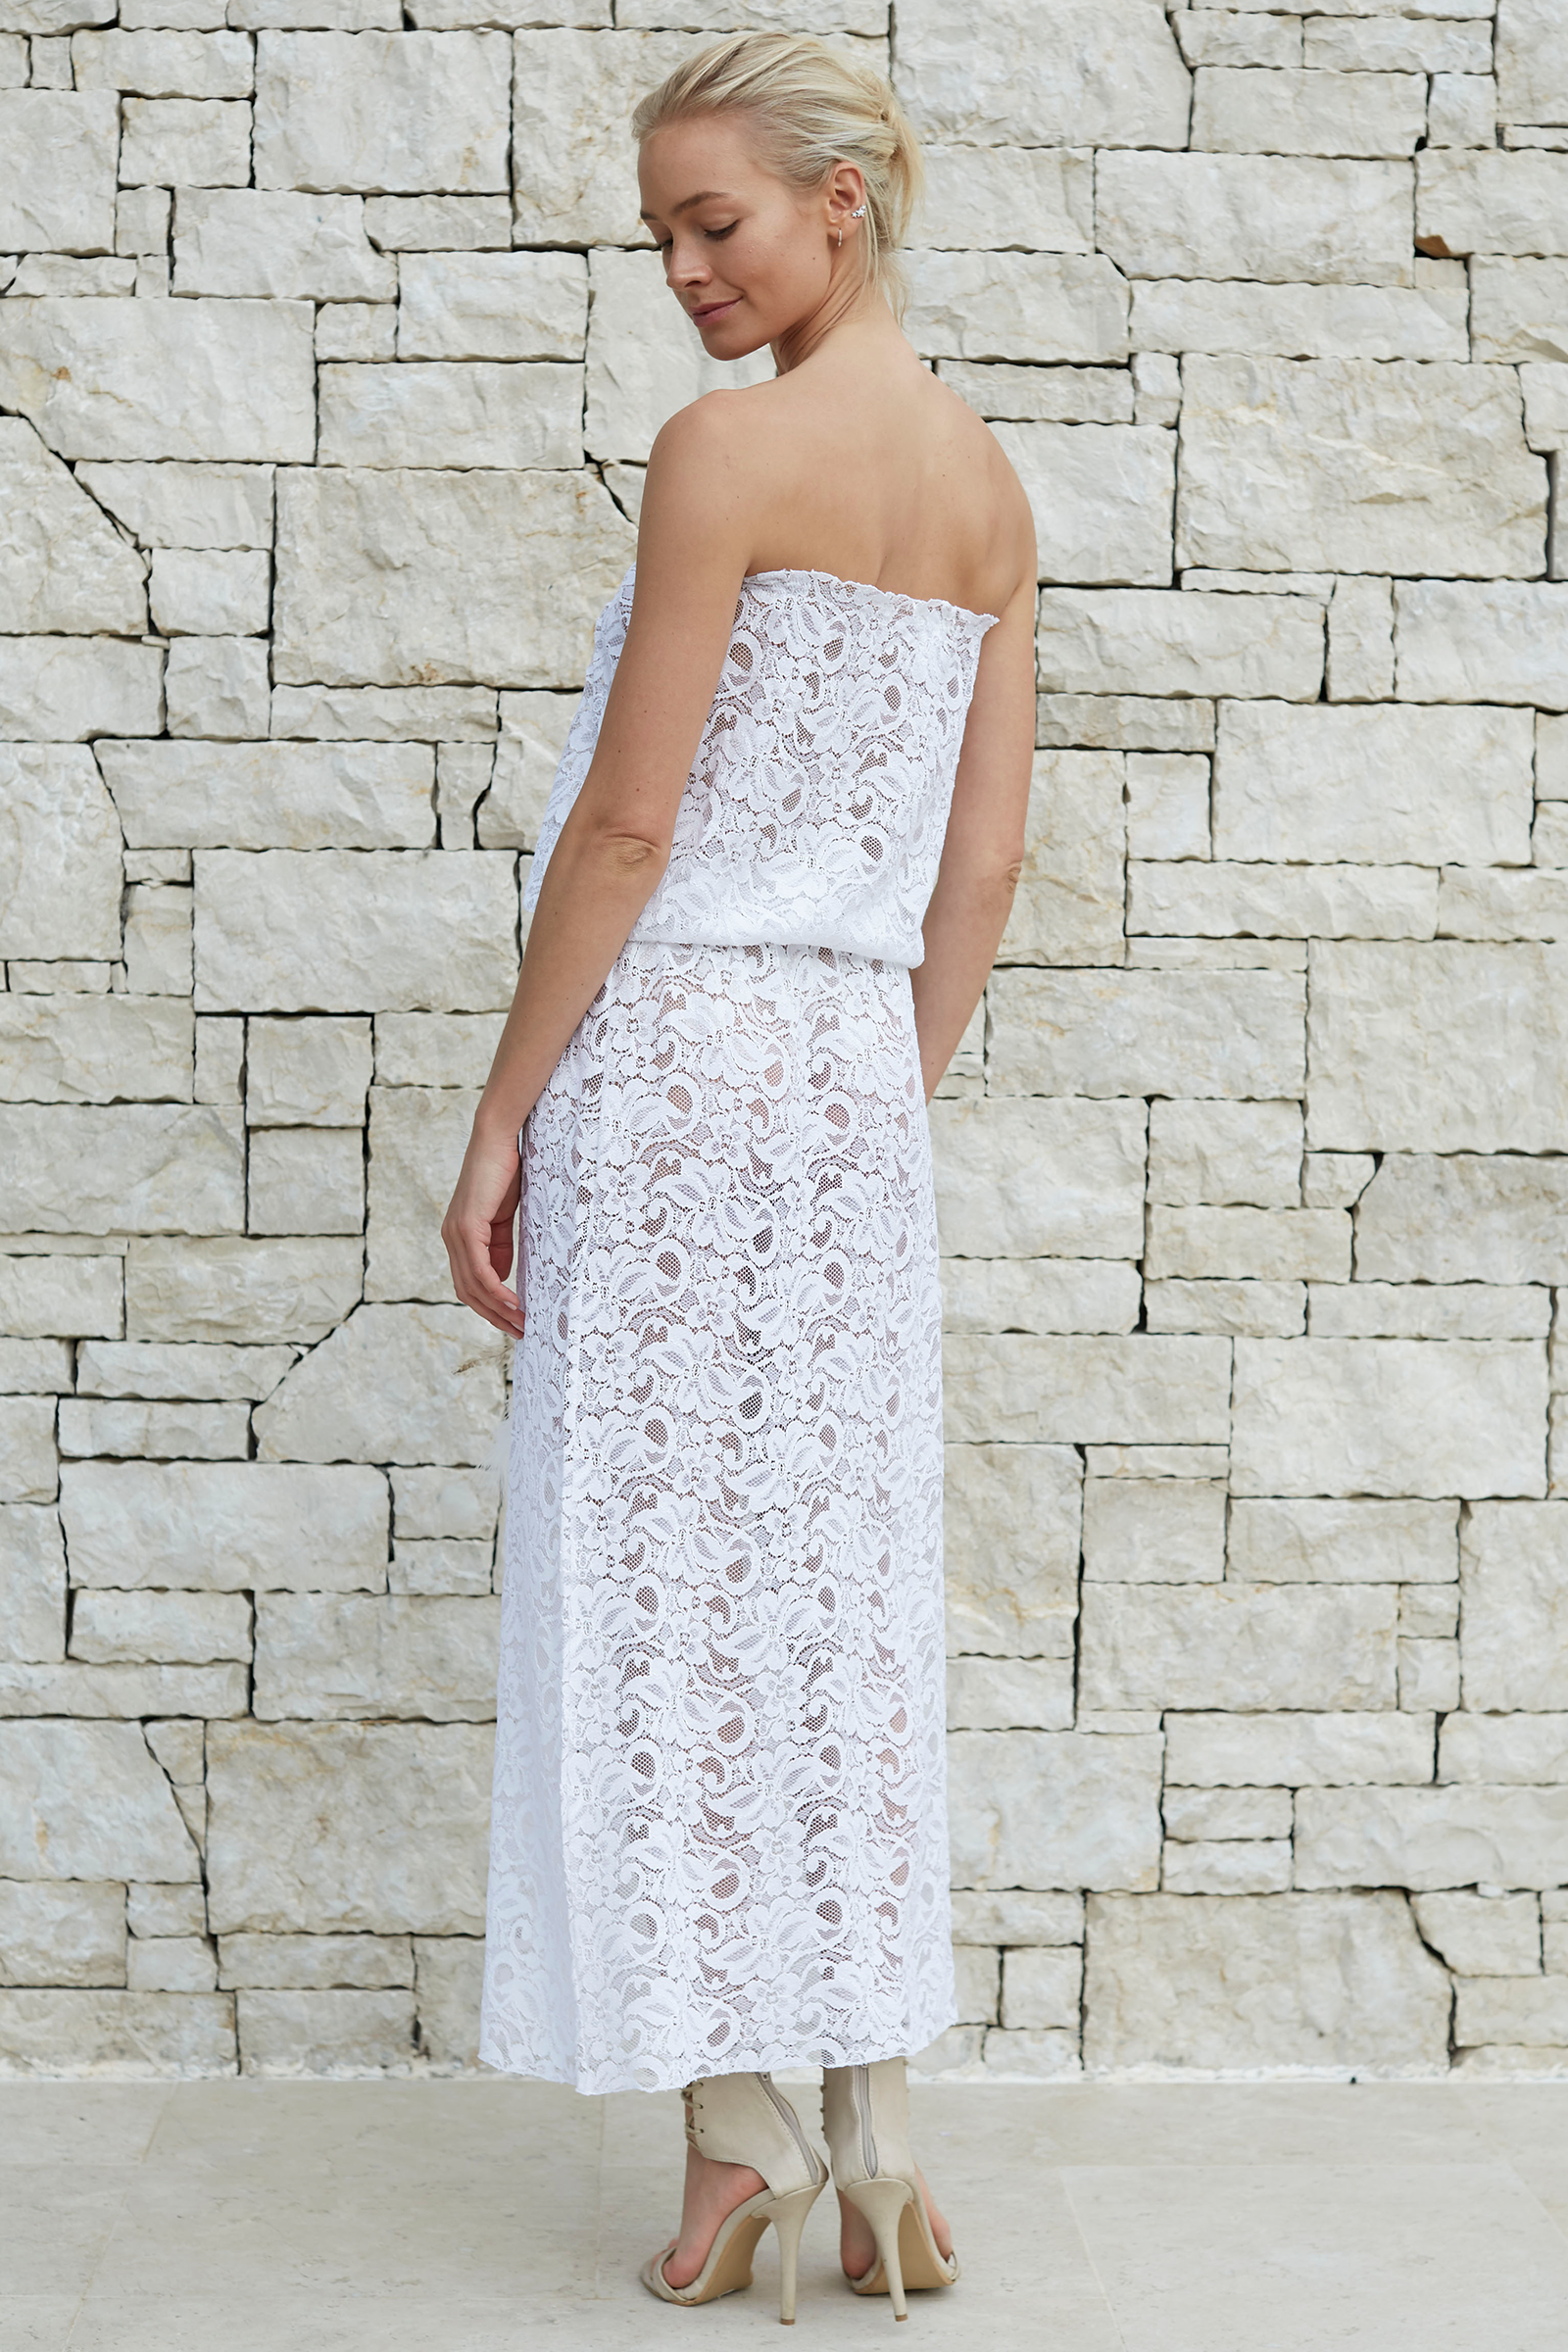 Annabel Long White Lace Bandeau Dress with Feather Belt - PICH